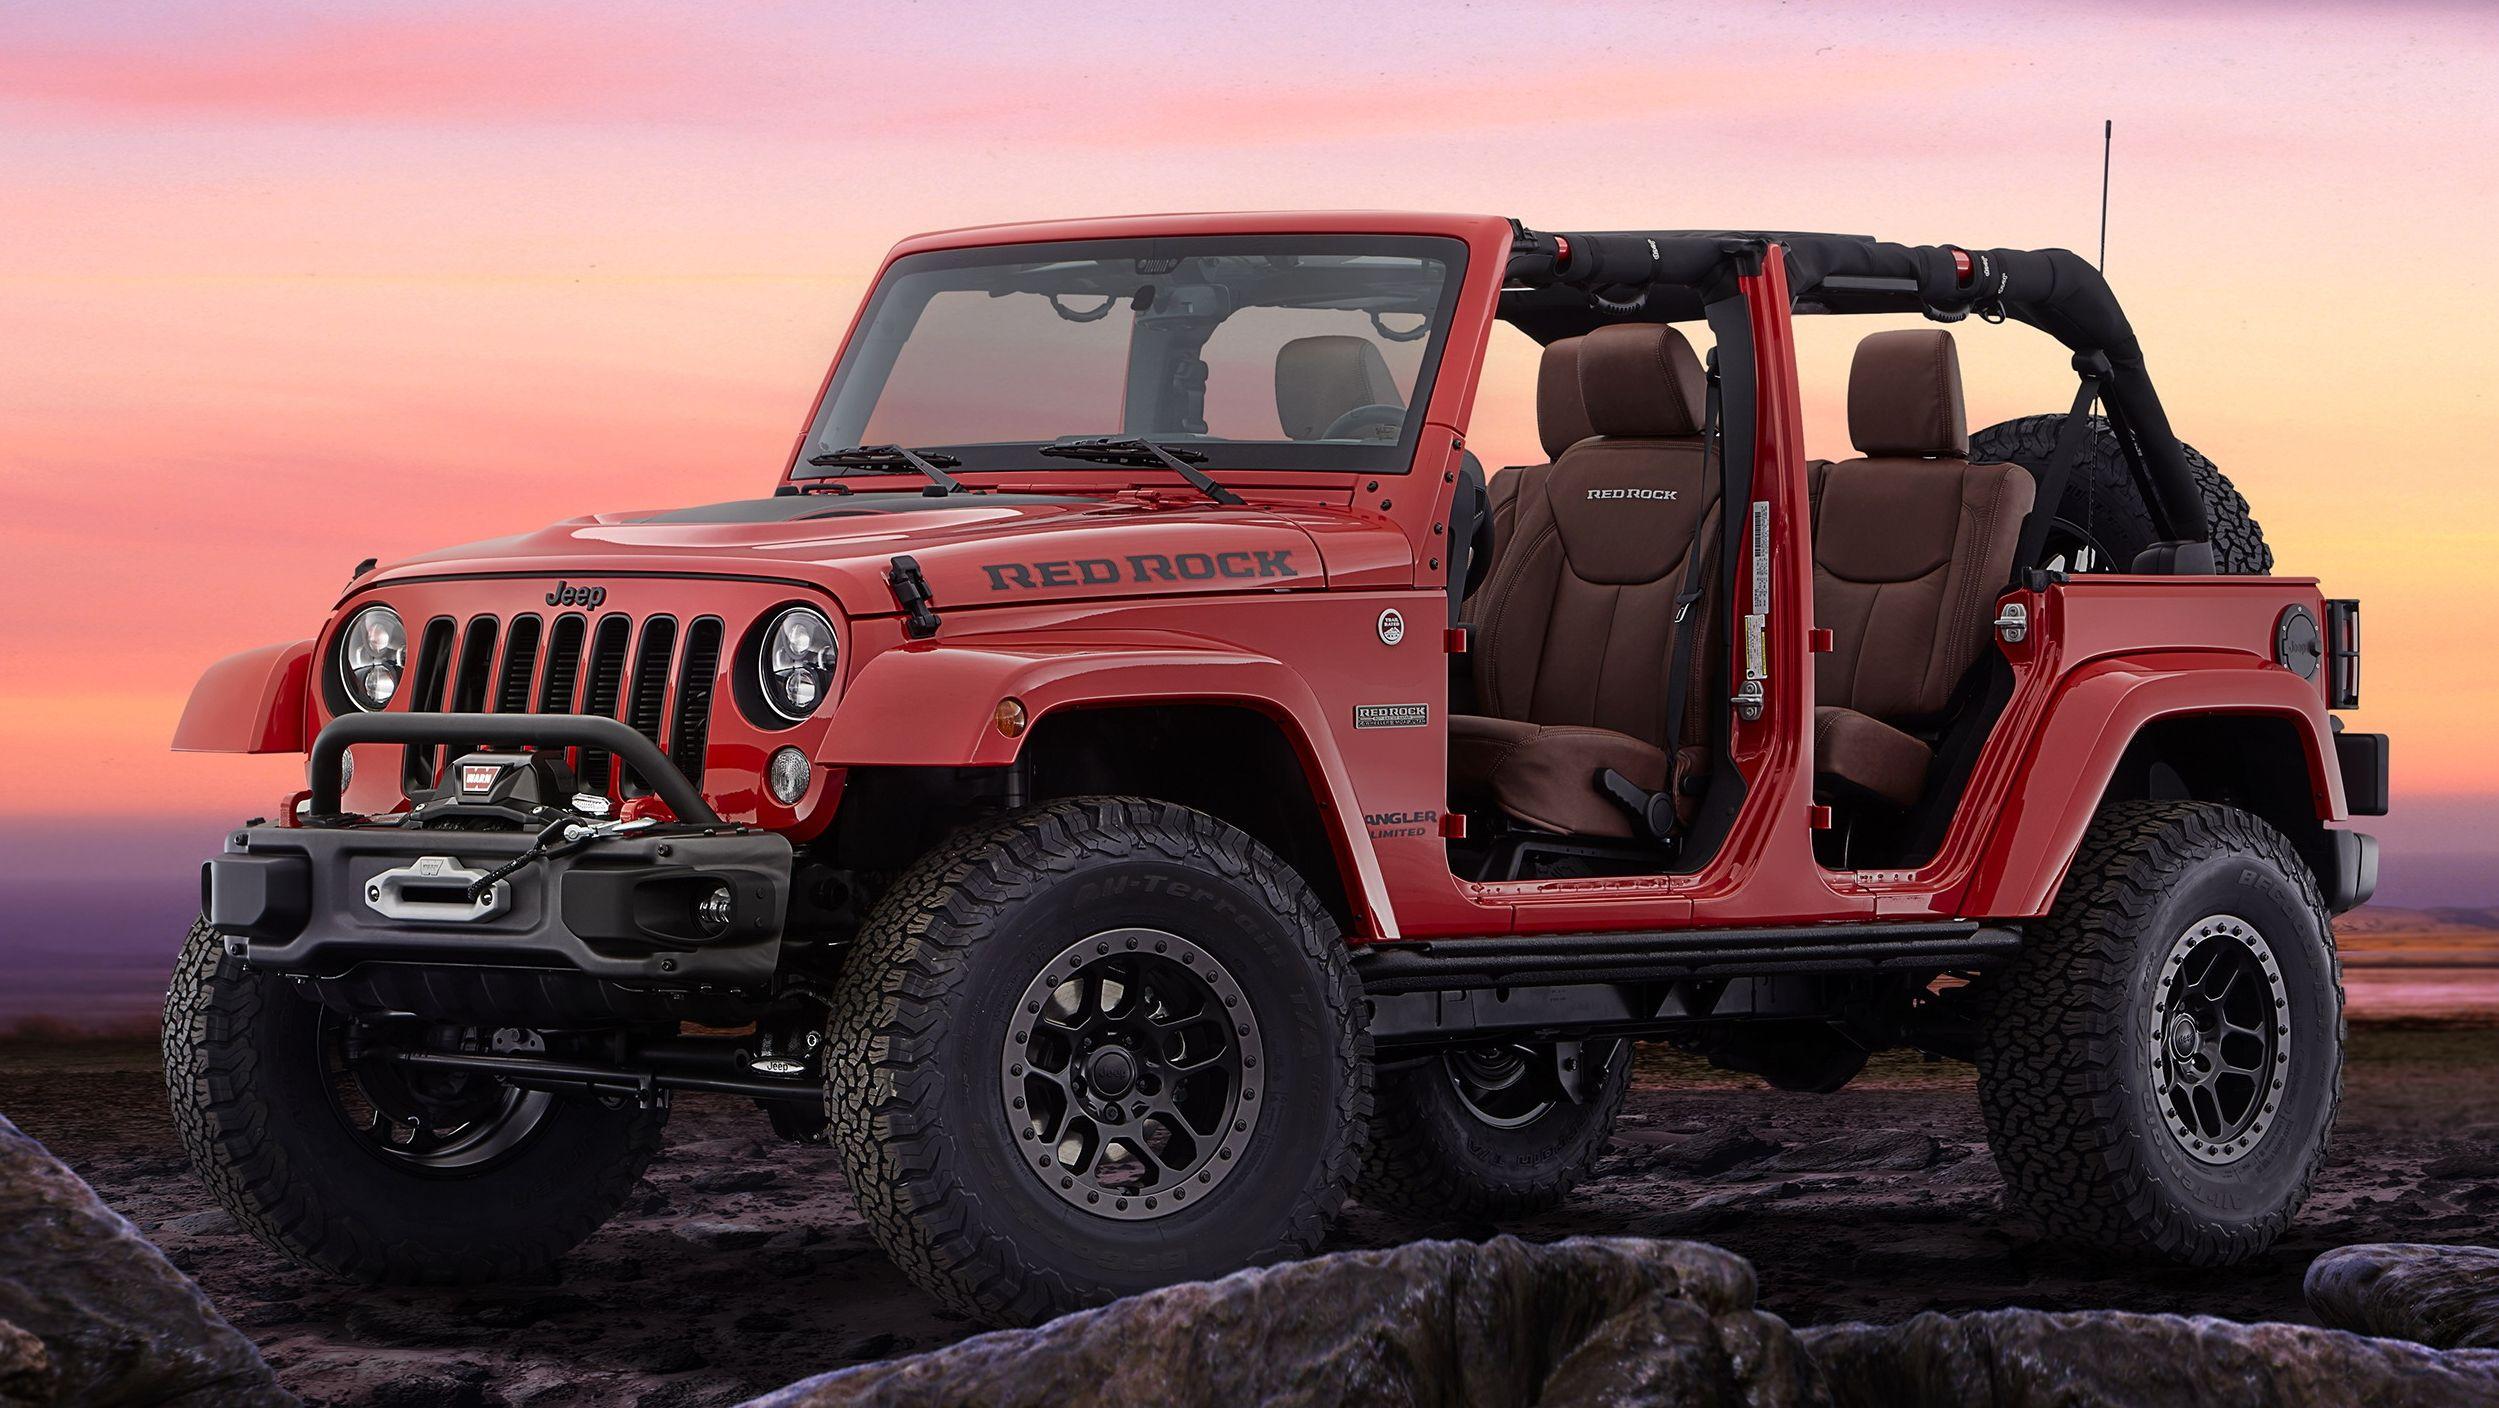 17+ Red And Black Jeep Wrangler Wallpaper full HD